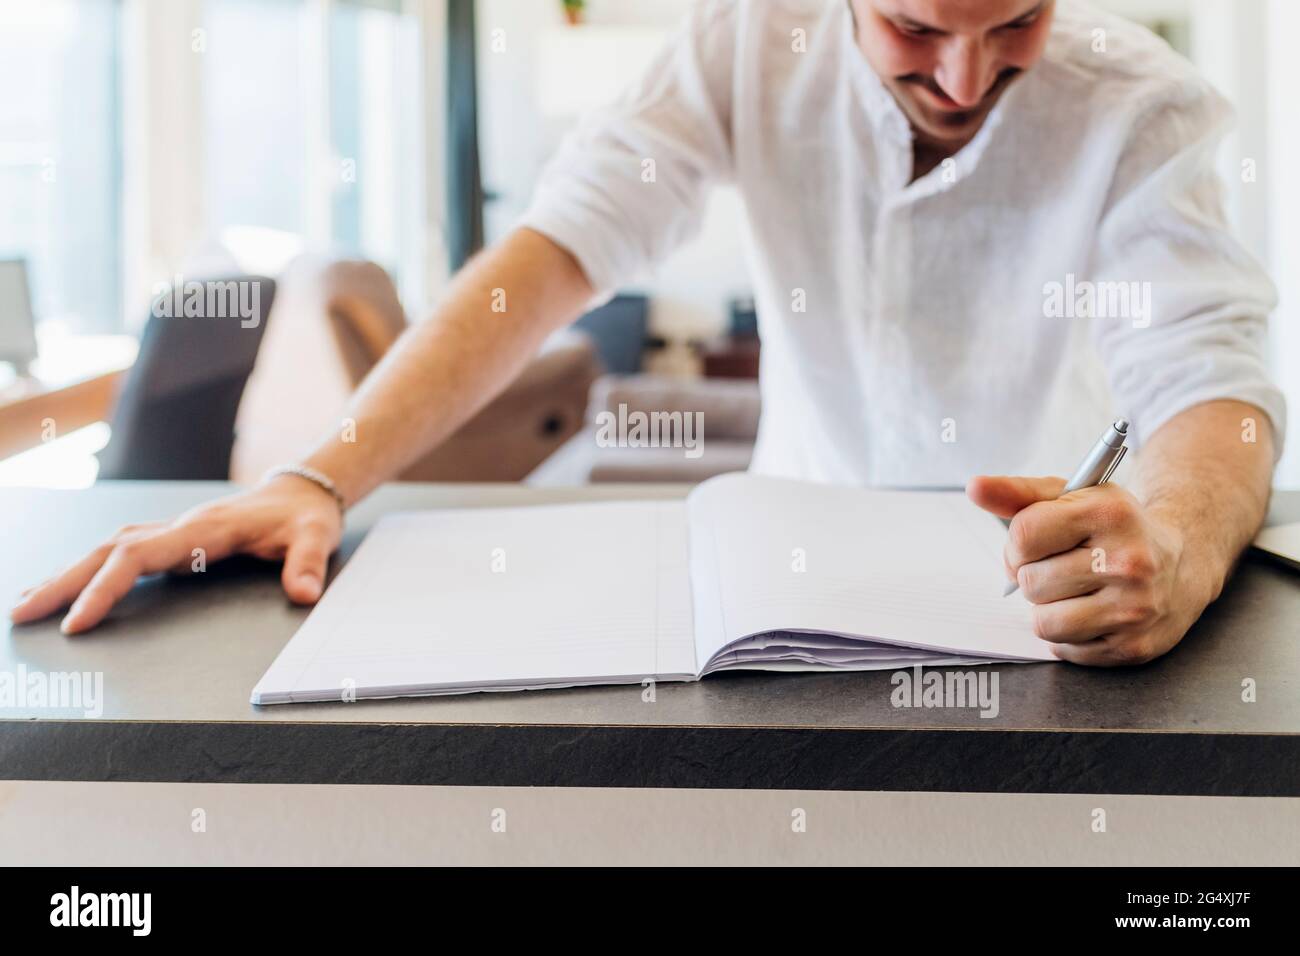 Smiling young man writing on book at kitchen island Stock Photo